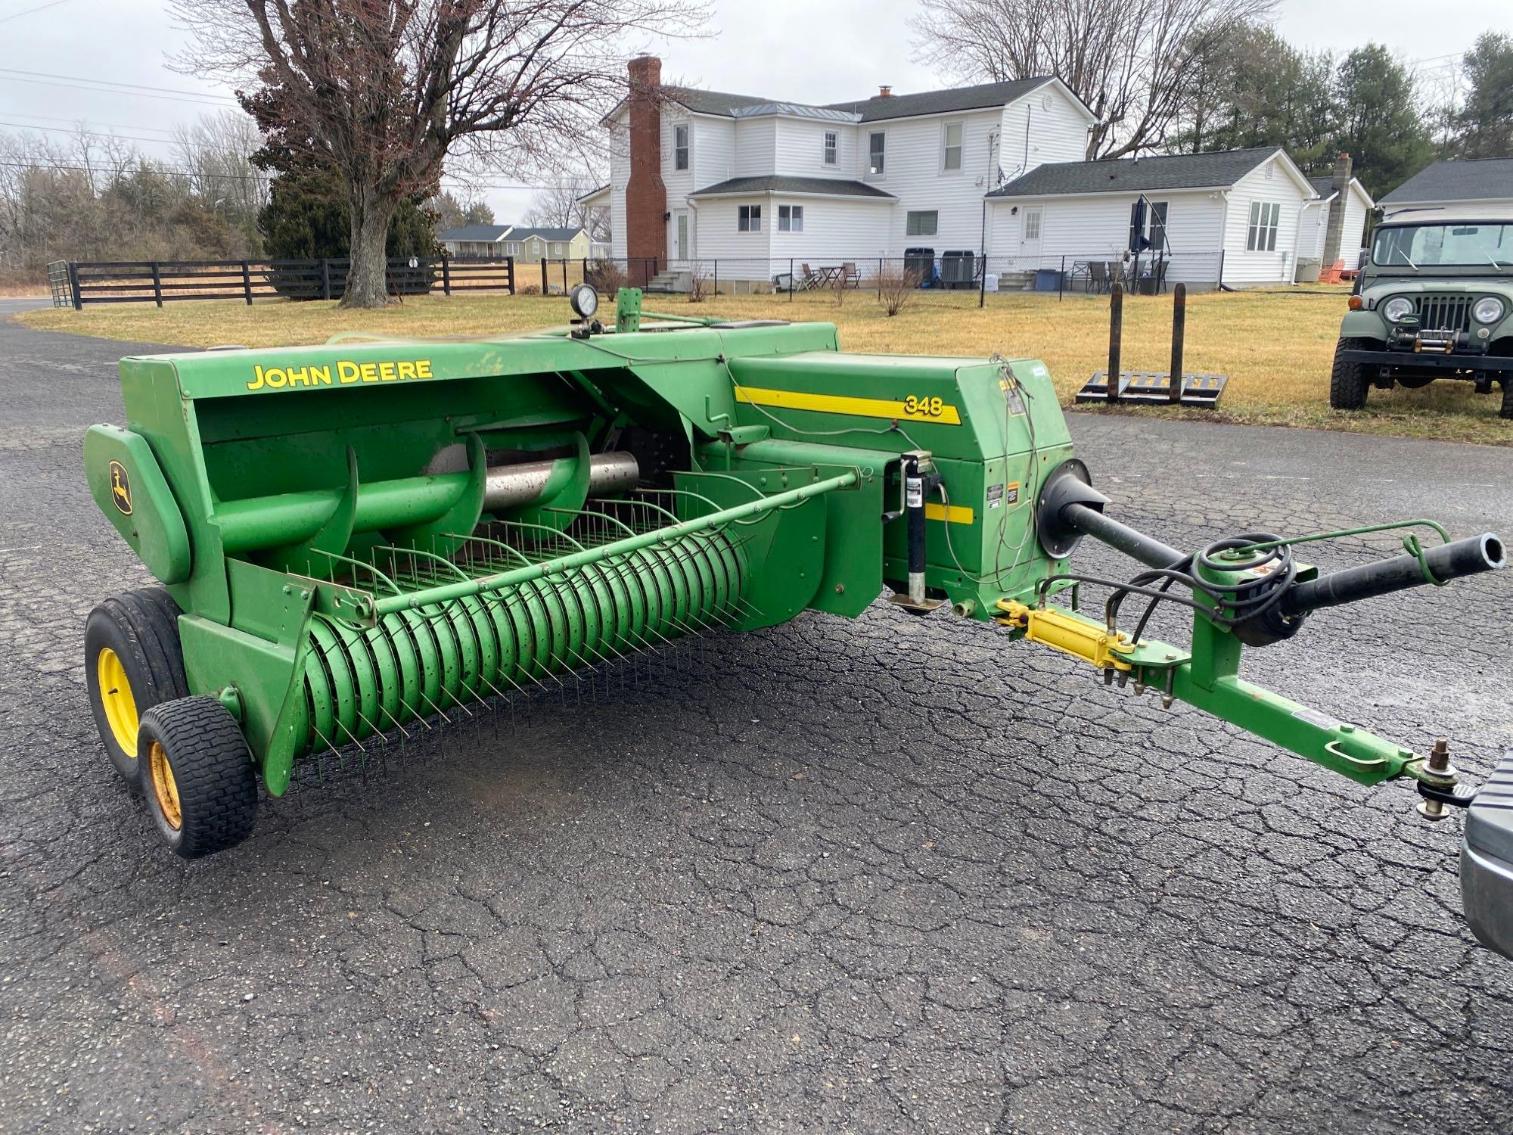 Image for John Deere Model 348 w/ Square Baler, Wire Tie square Bales, Works as should per seller